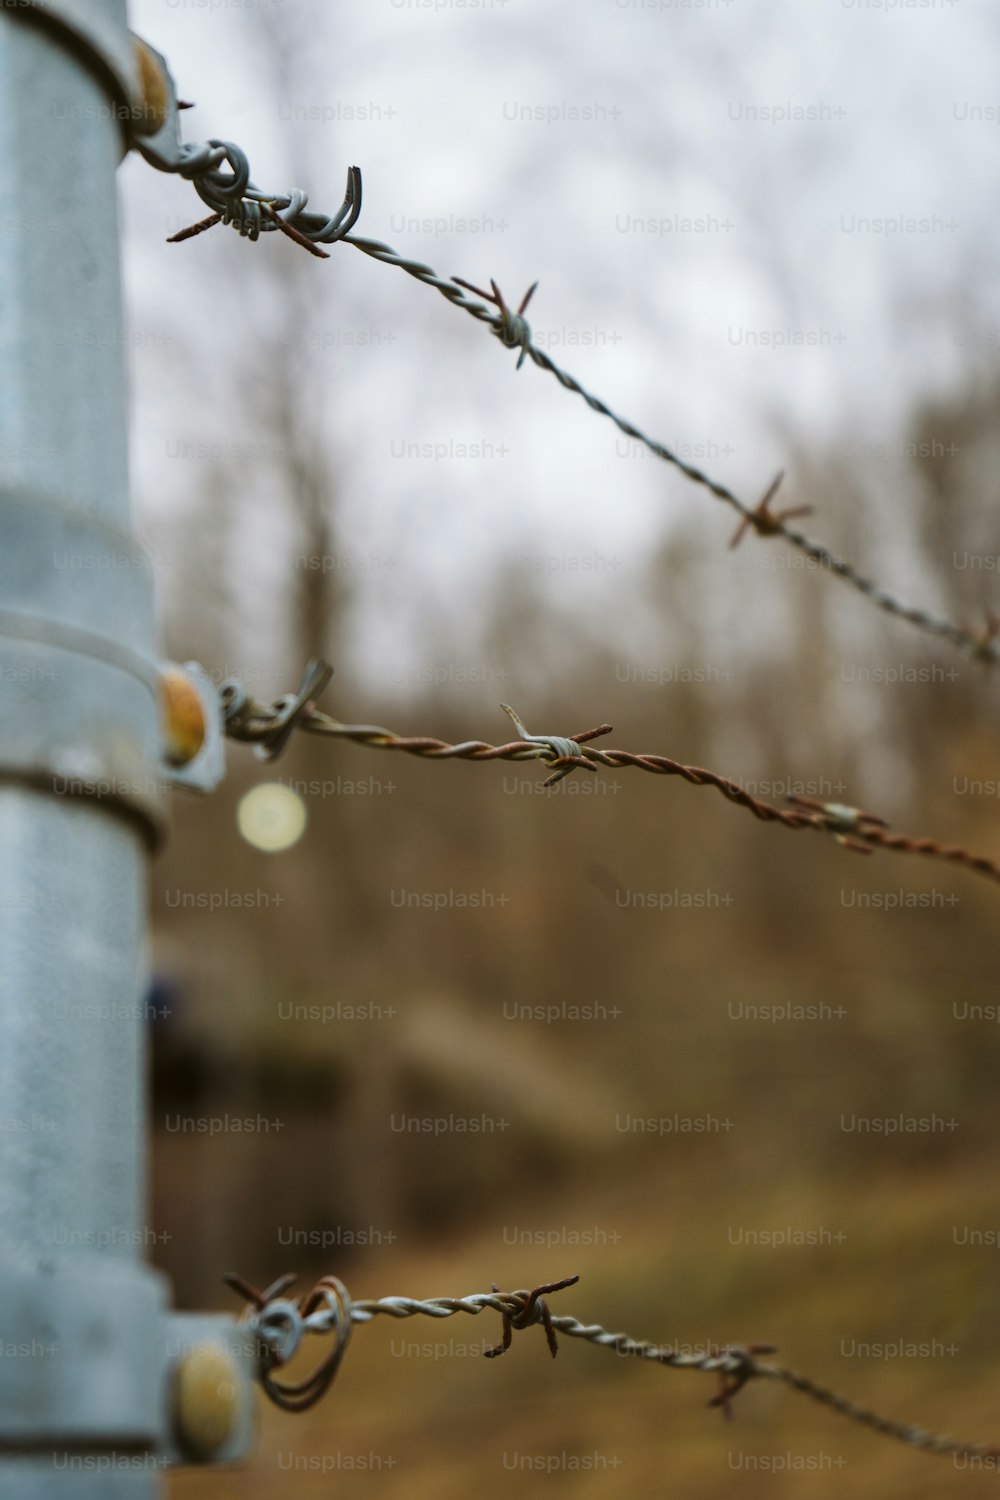 a close up of a barbed wire fence